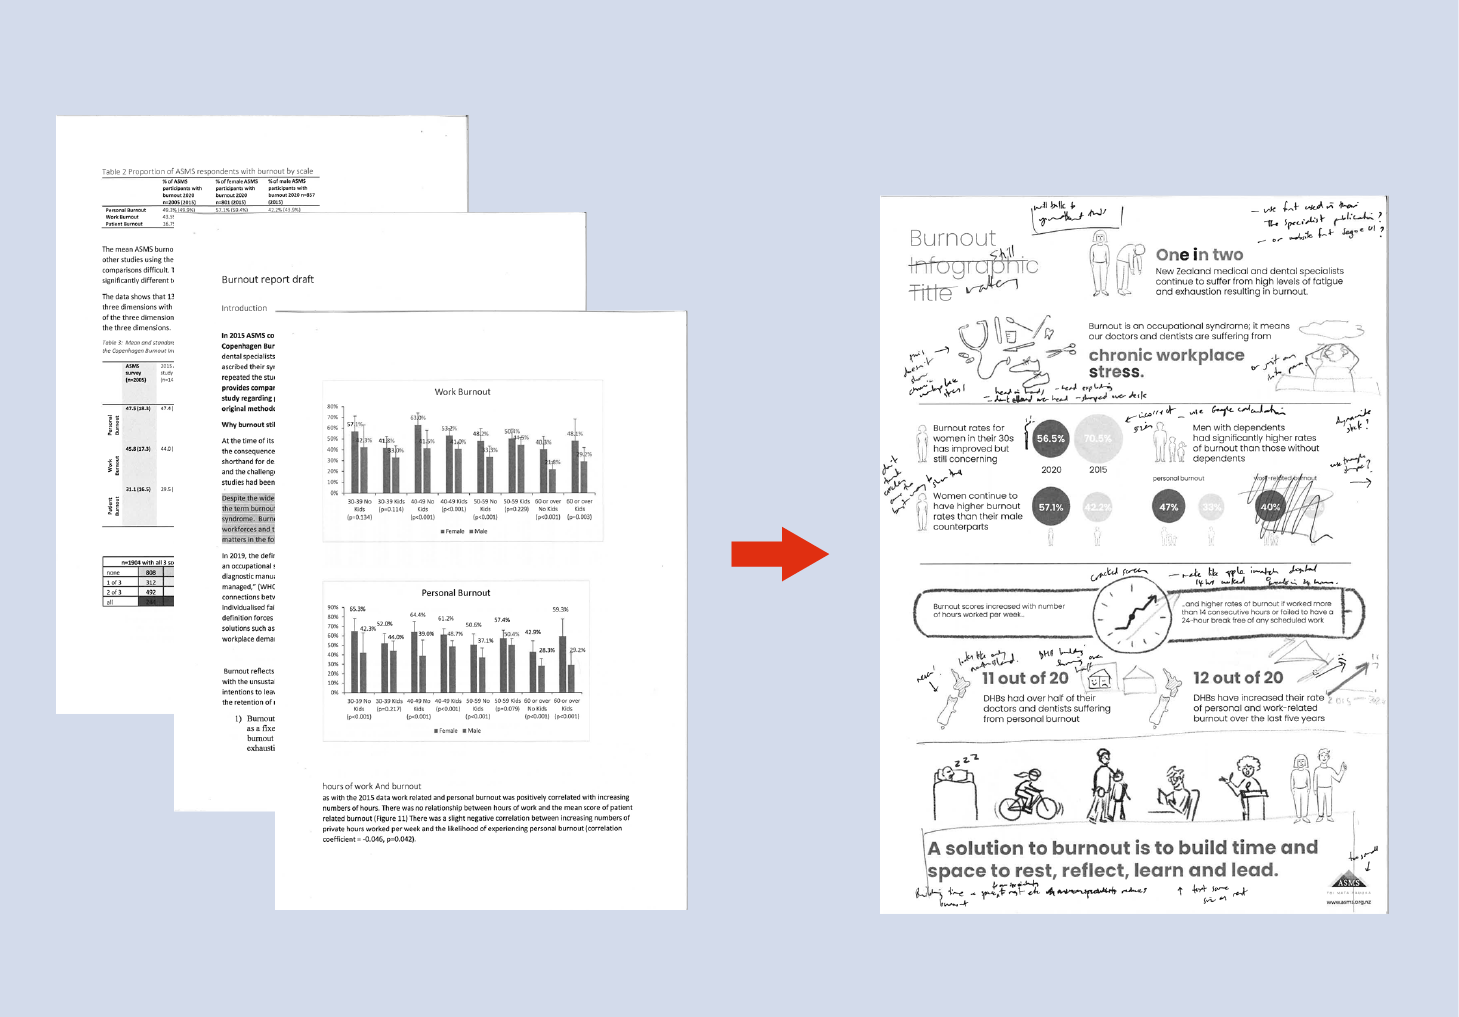 Image of Data example and infographic sketch beside it